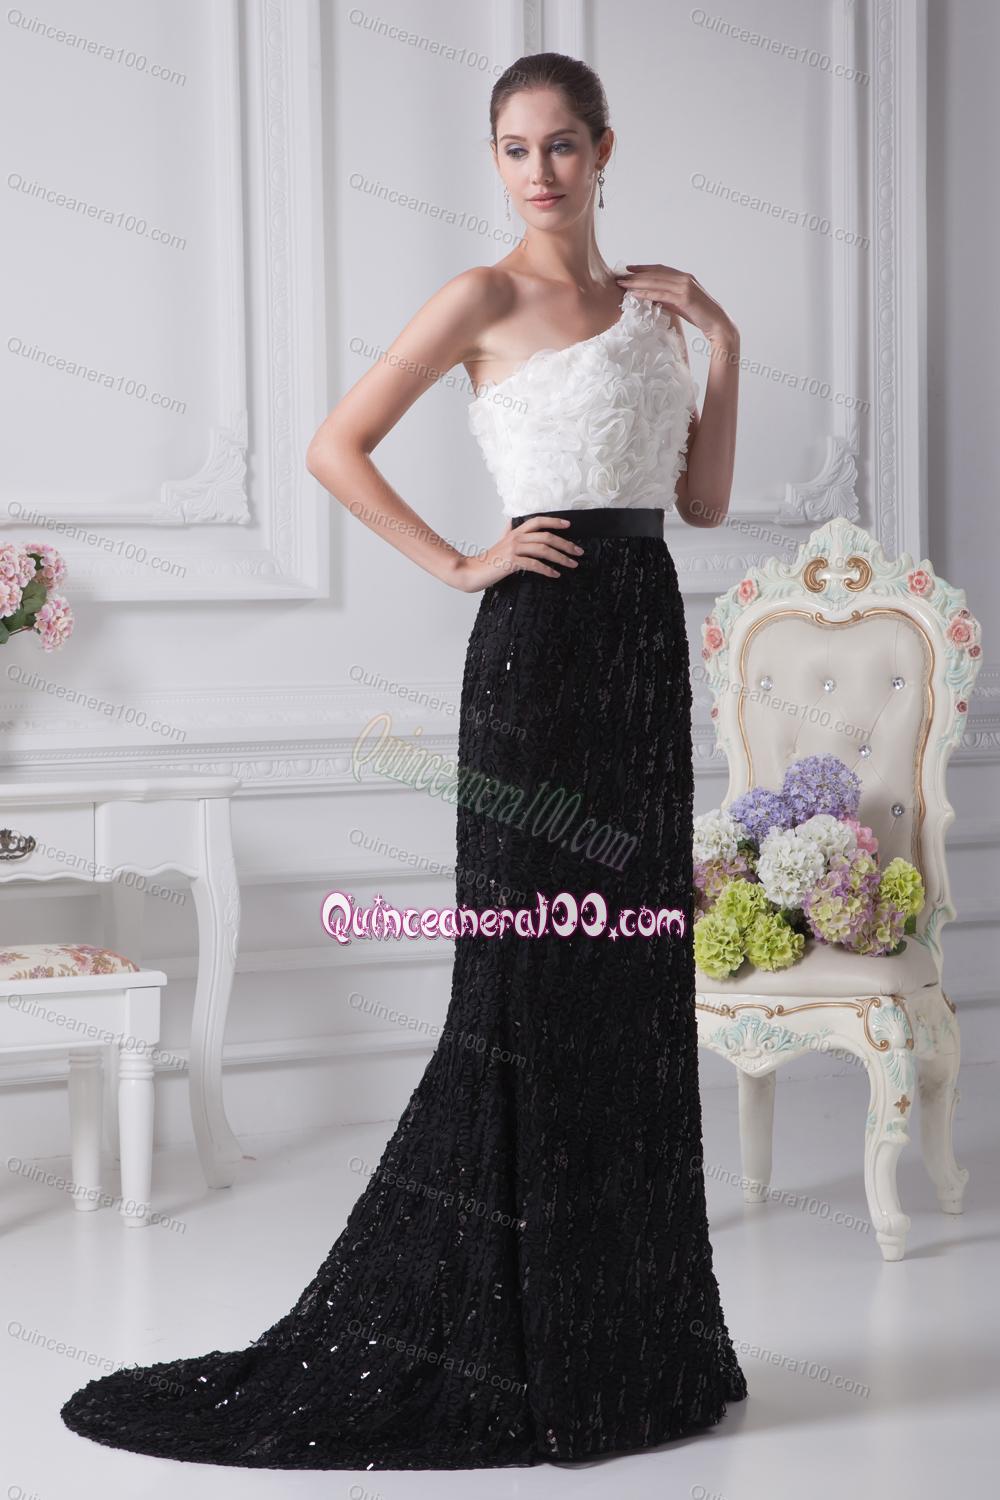 Exclusive One Shoulder Sash Black and White Mother of the Dresses For 2014